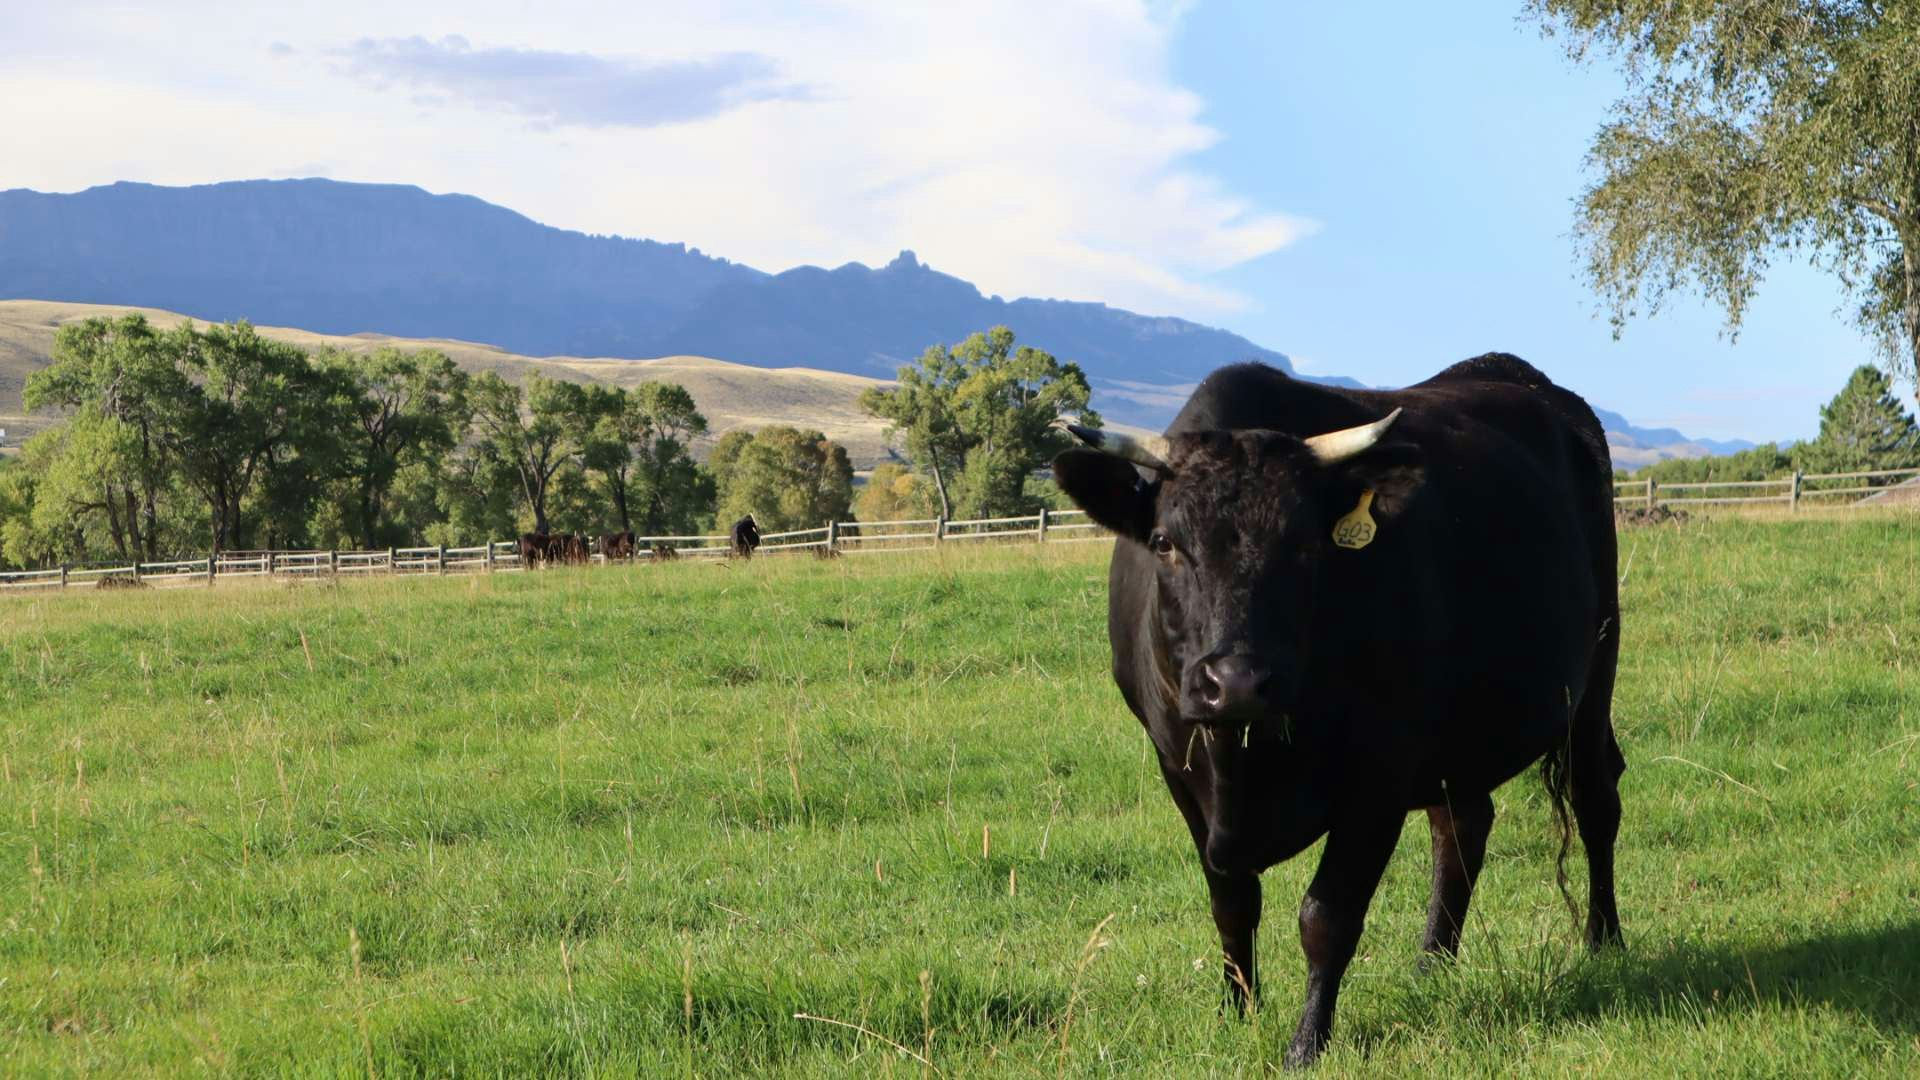 The wagyu beef raised on the Hawks Hill ranch near Cody, Wyoming, grade out in the top 1% of beef on the planet. That has a lot to do with the ranch's meticulous care in protecting its small herd's genetics.